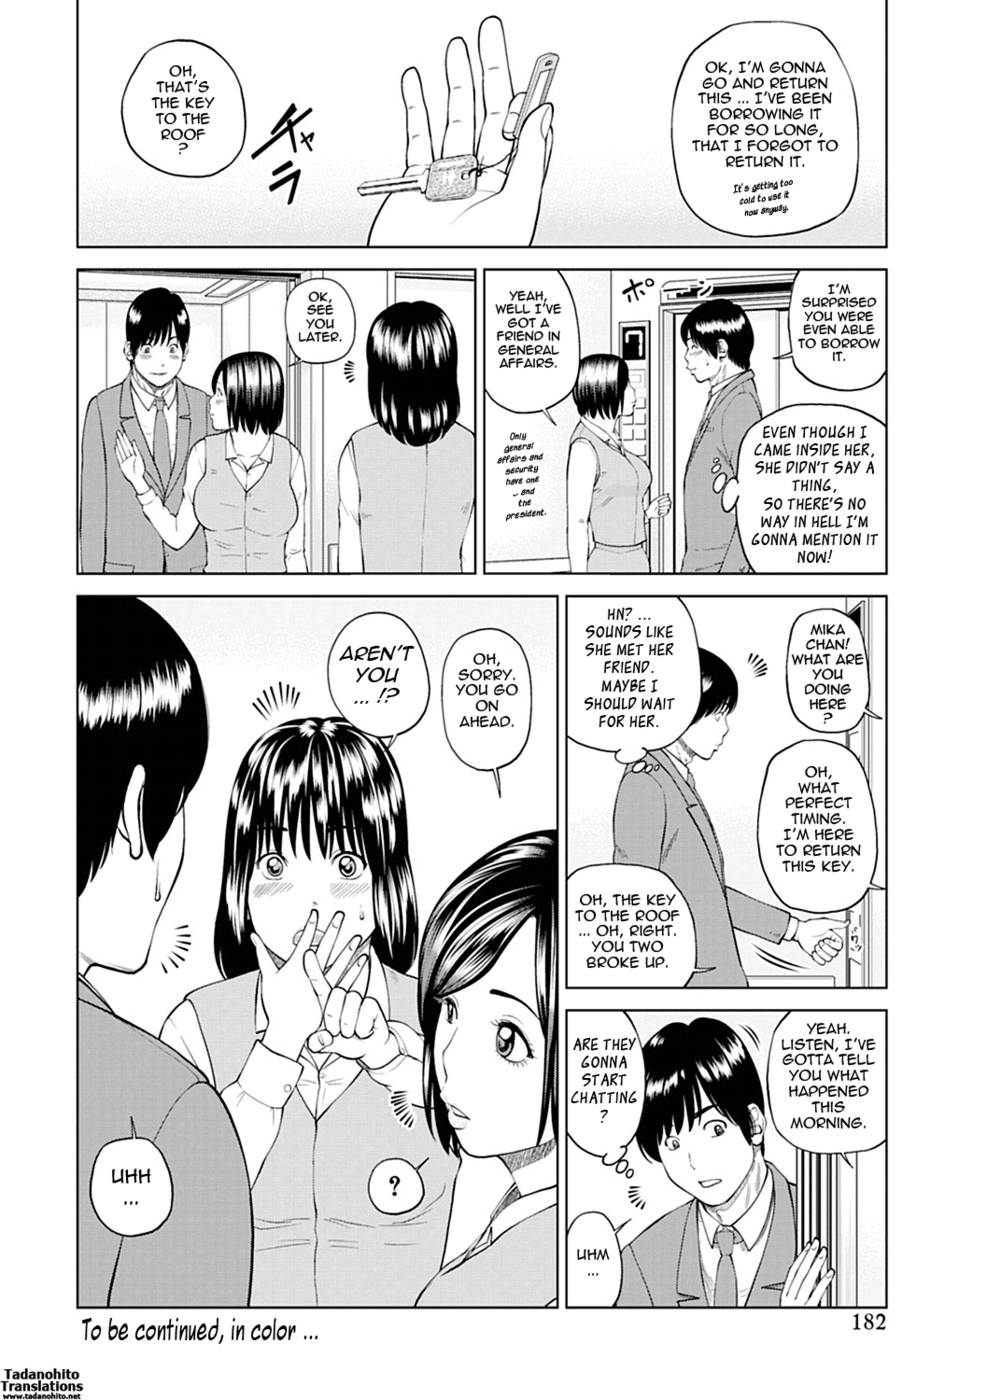 Hentai Manga Comic-34 Year Old Unsatisfied Wife-Chapter 9-Uniforms Office Lady-First Half-20